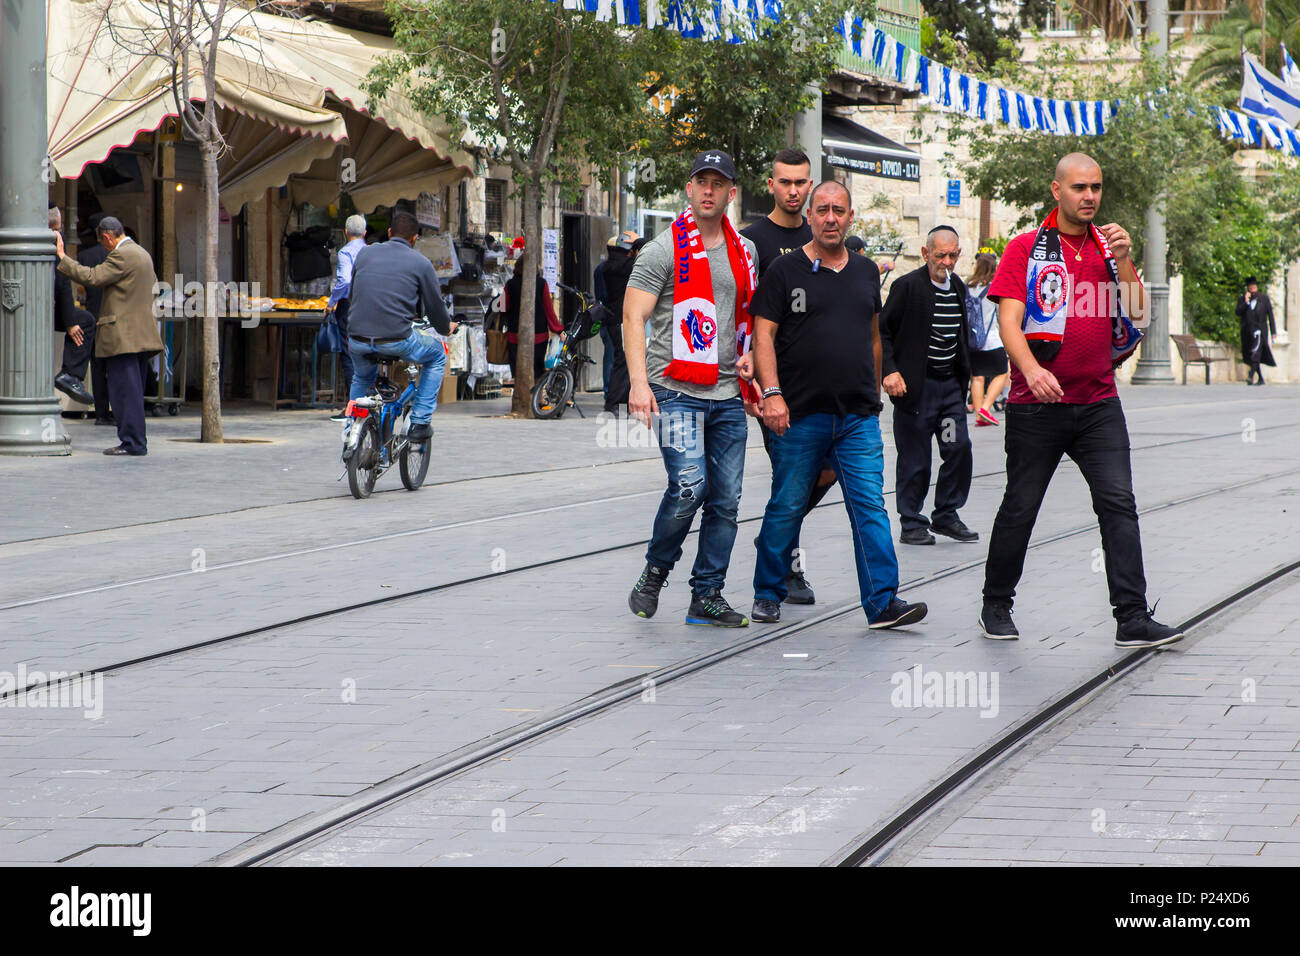 9 May 2013 A group of Hapoel football team supporters crossing Jaffa street in Jerusalem Israel before their match with Beitar Jerusalam Stock Photo